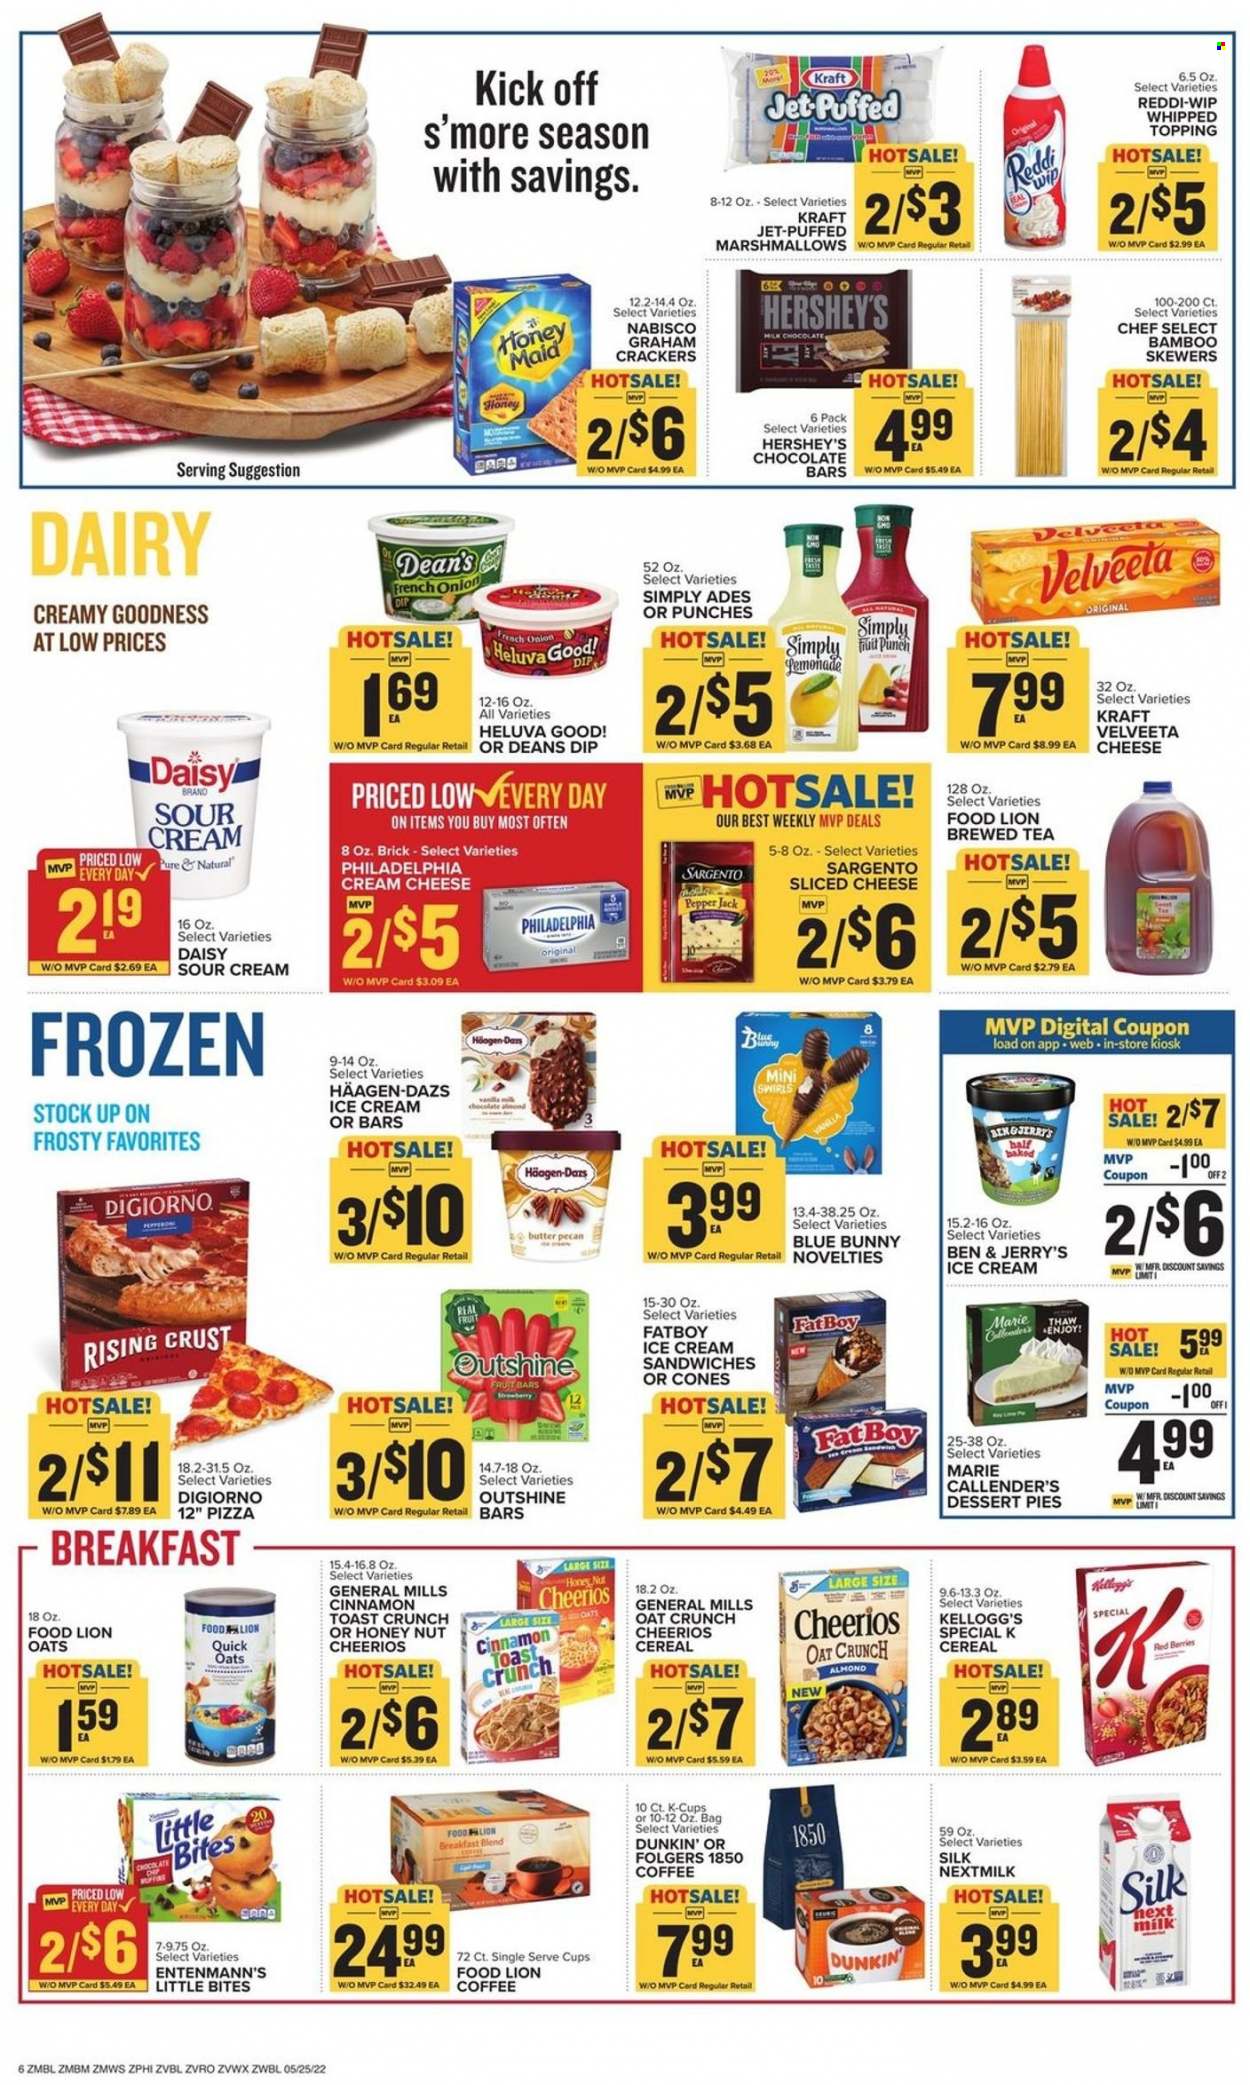 thumbnail - Food Lion Flyer - 05/25/2022 - 05/31/2022 - Sales products - muffin, Entenmann's, onion, pizza, Marie Callender's, Kraft®, cream cheese, sliced cheese, Philadelphia, Pepper Jack cheese, Sargento, Silk, butter, sour cream, dip, ice cream, ice cream sandwich, Hershey's, Häagen-Dazs, Ben & Jerry's, Blue Bunny, graham crackers, marshmallows, milk chocolate, crackers, Kellogg's, Little Bites, chocolate bar, oats, topping, cereals, Cheerios, Quick Oats, Honey Maid, cinnamon, lemonade, fruit punch, tea, coffee, Folgers, coffee capsules, K-Cups, breakfast blend, Jet. Page 6.